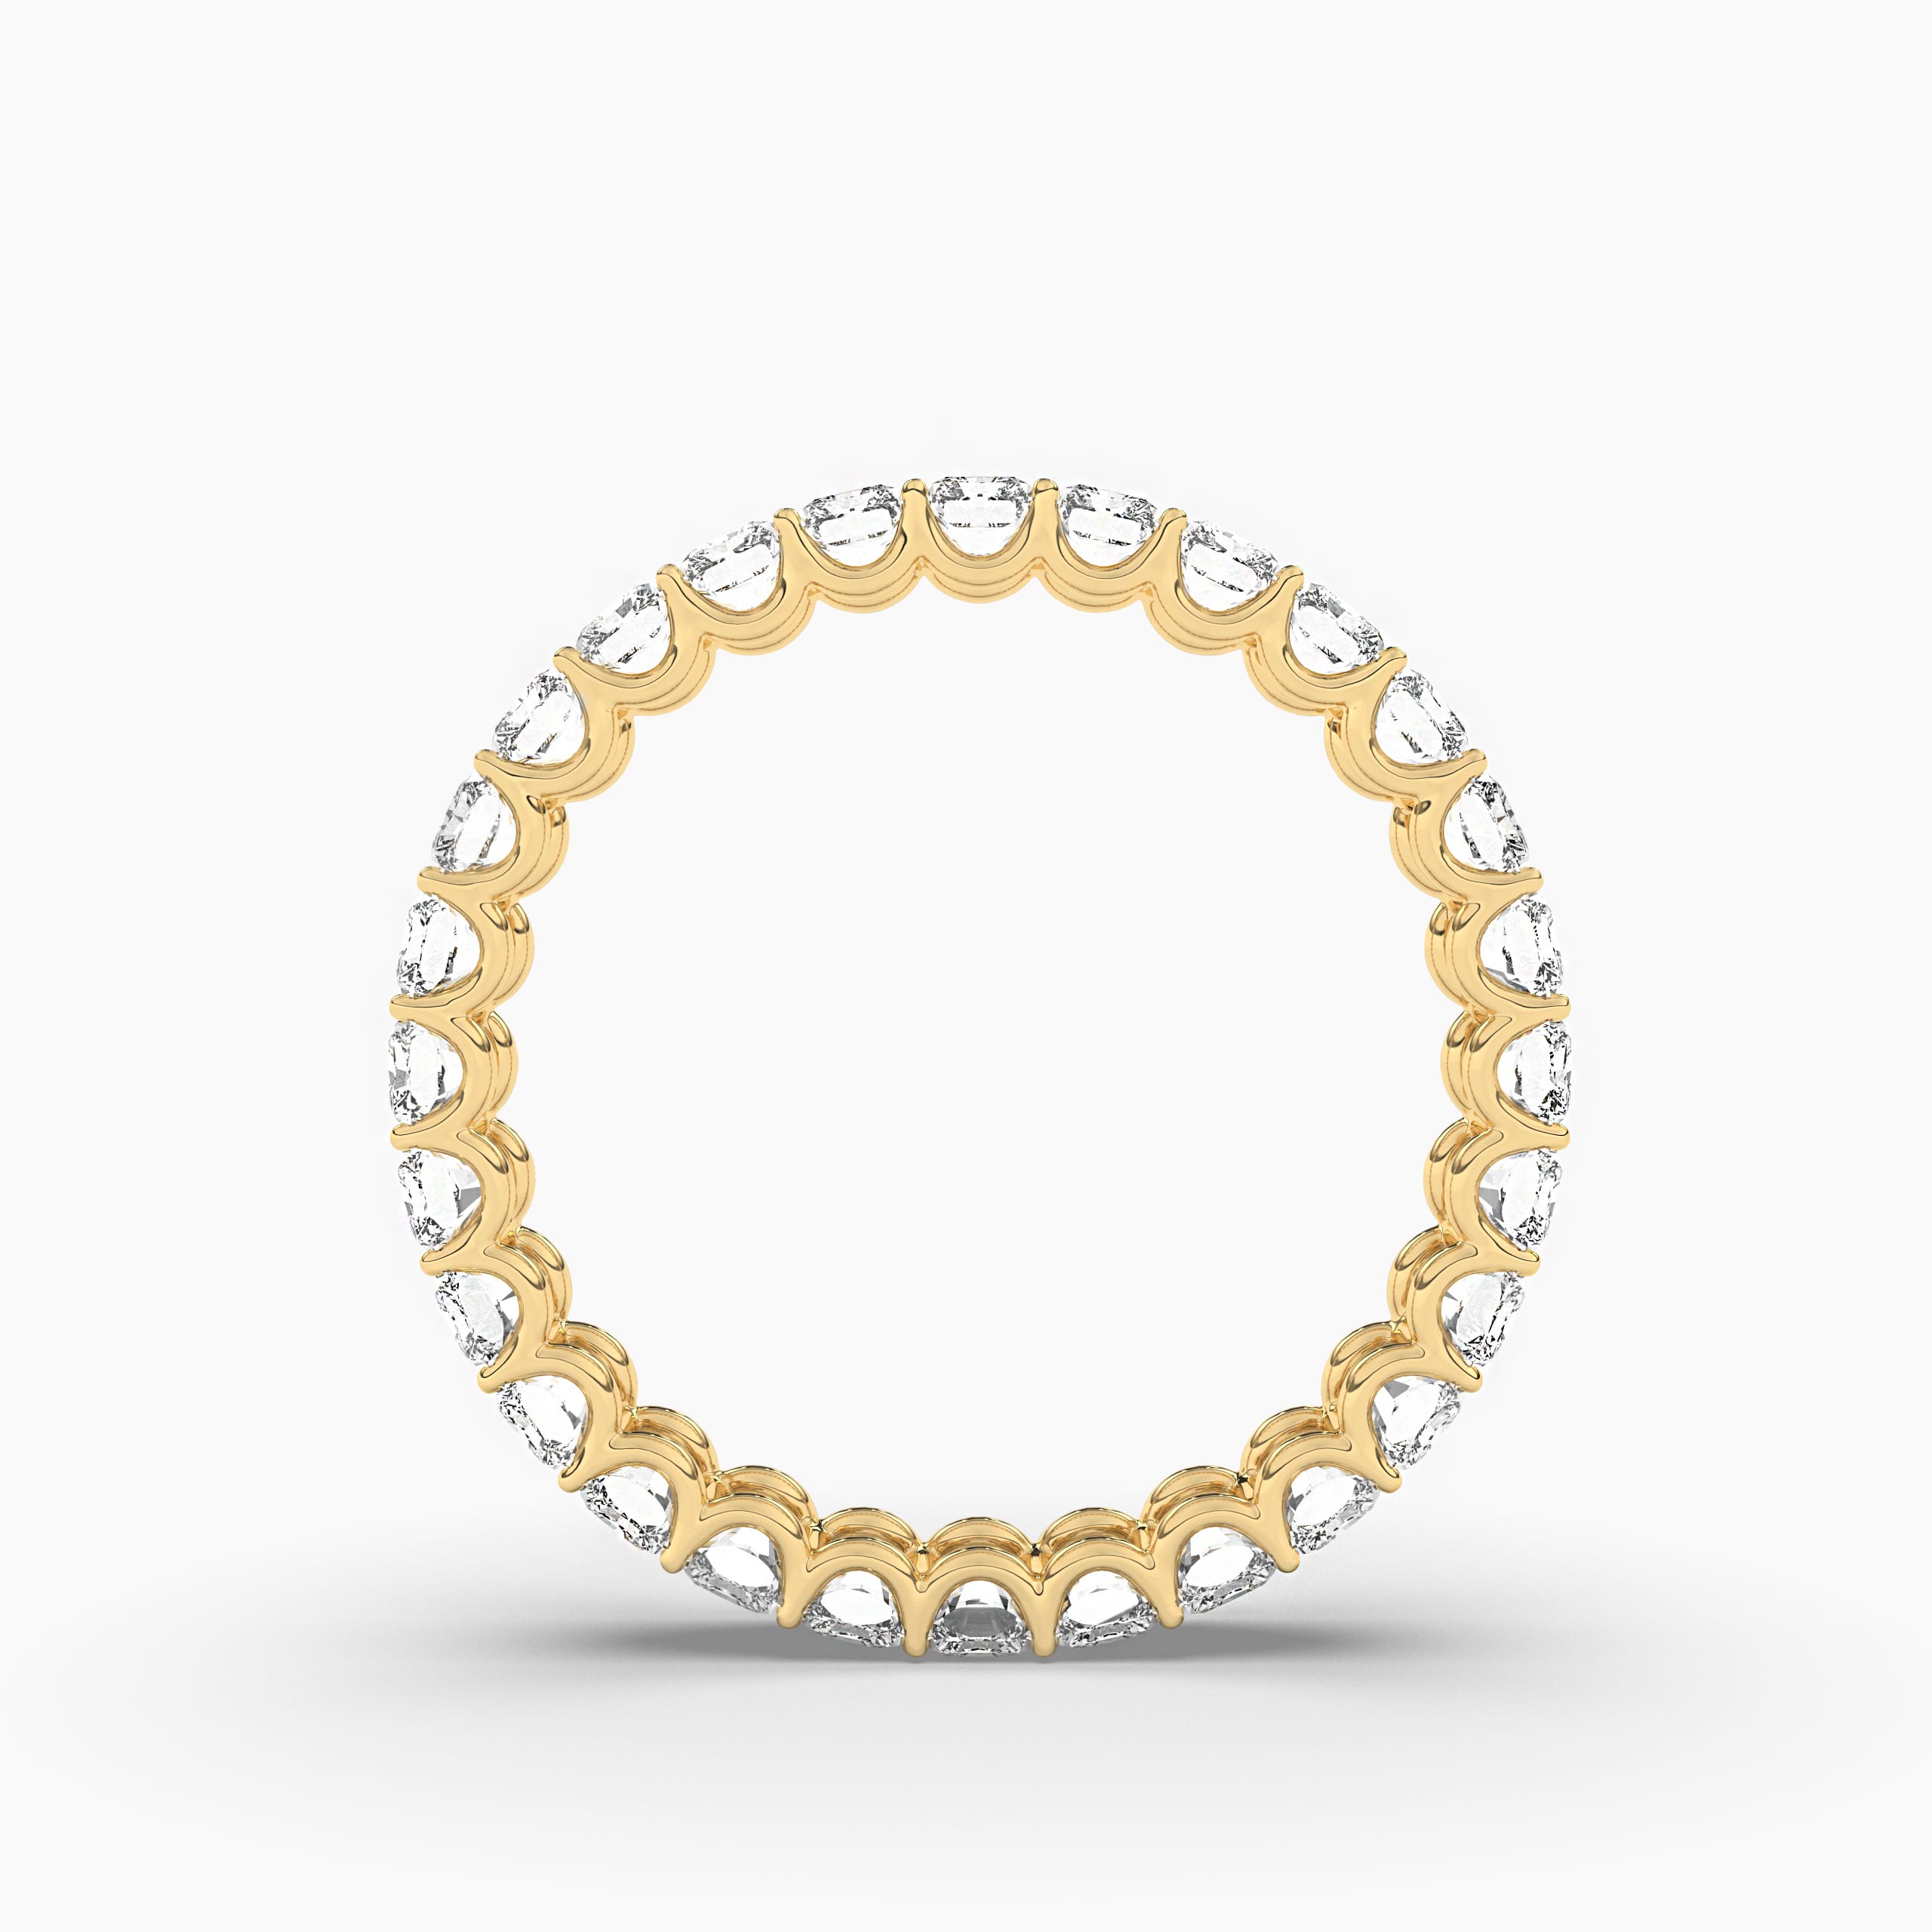 3.48carat radiant cut gold band in yellow gold